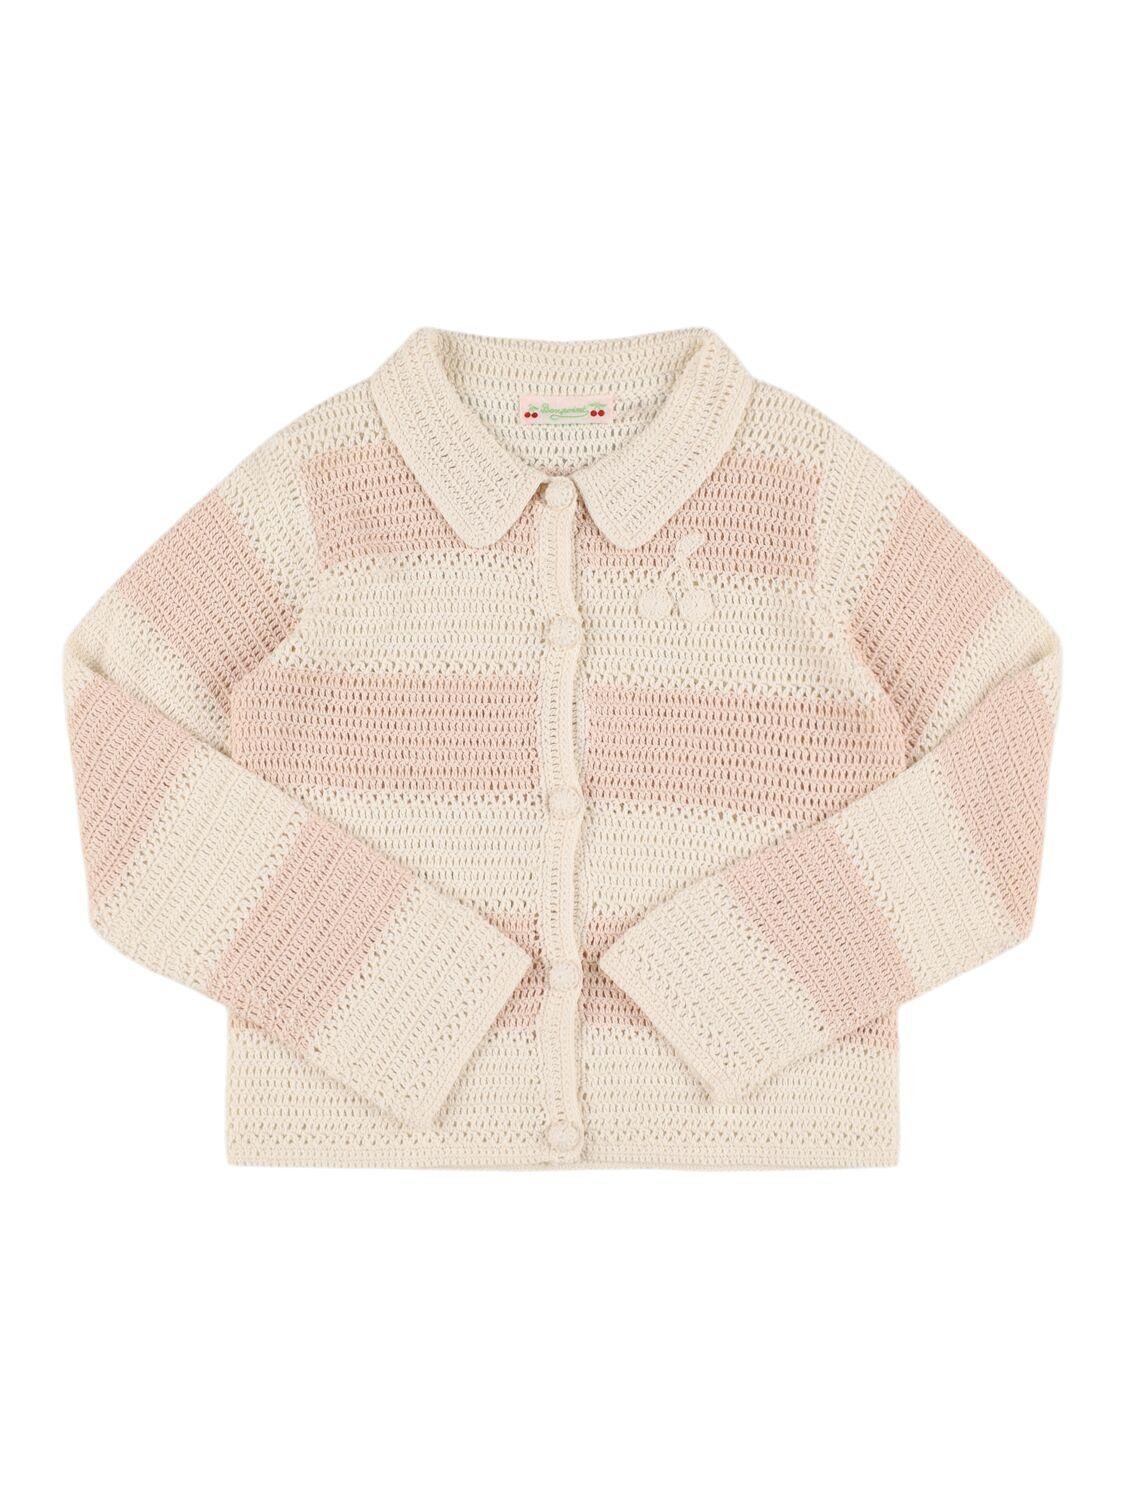 Hand-crocheted Cotton Cardigan by BONPOINT